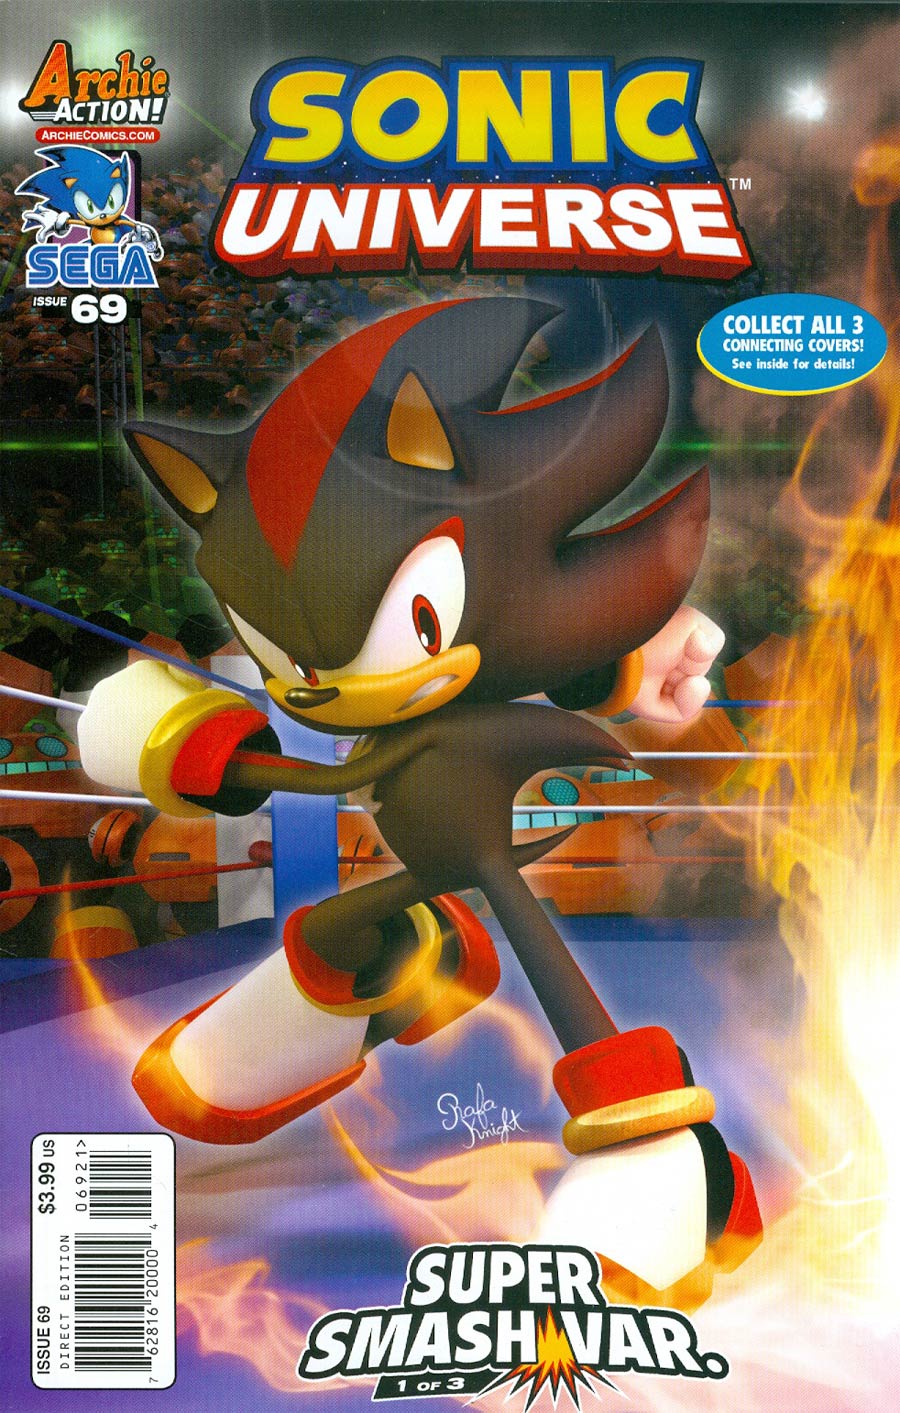 Sonic Universe #69 Cover B Variant Super Smash Cover